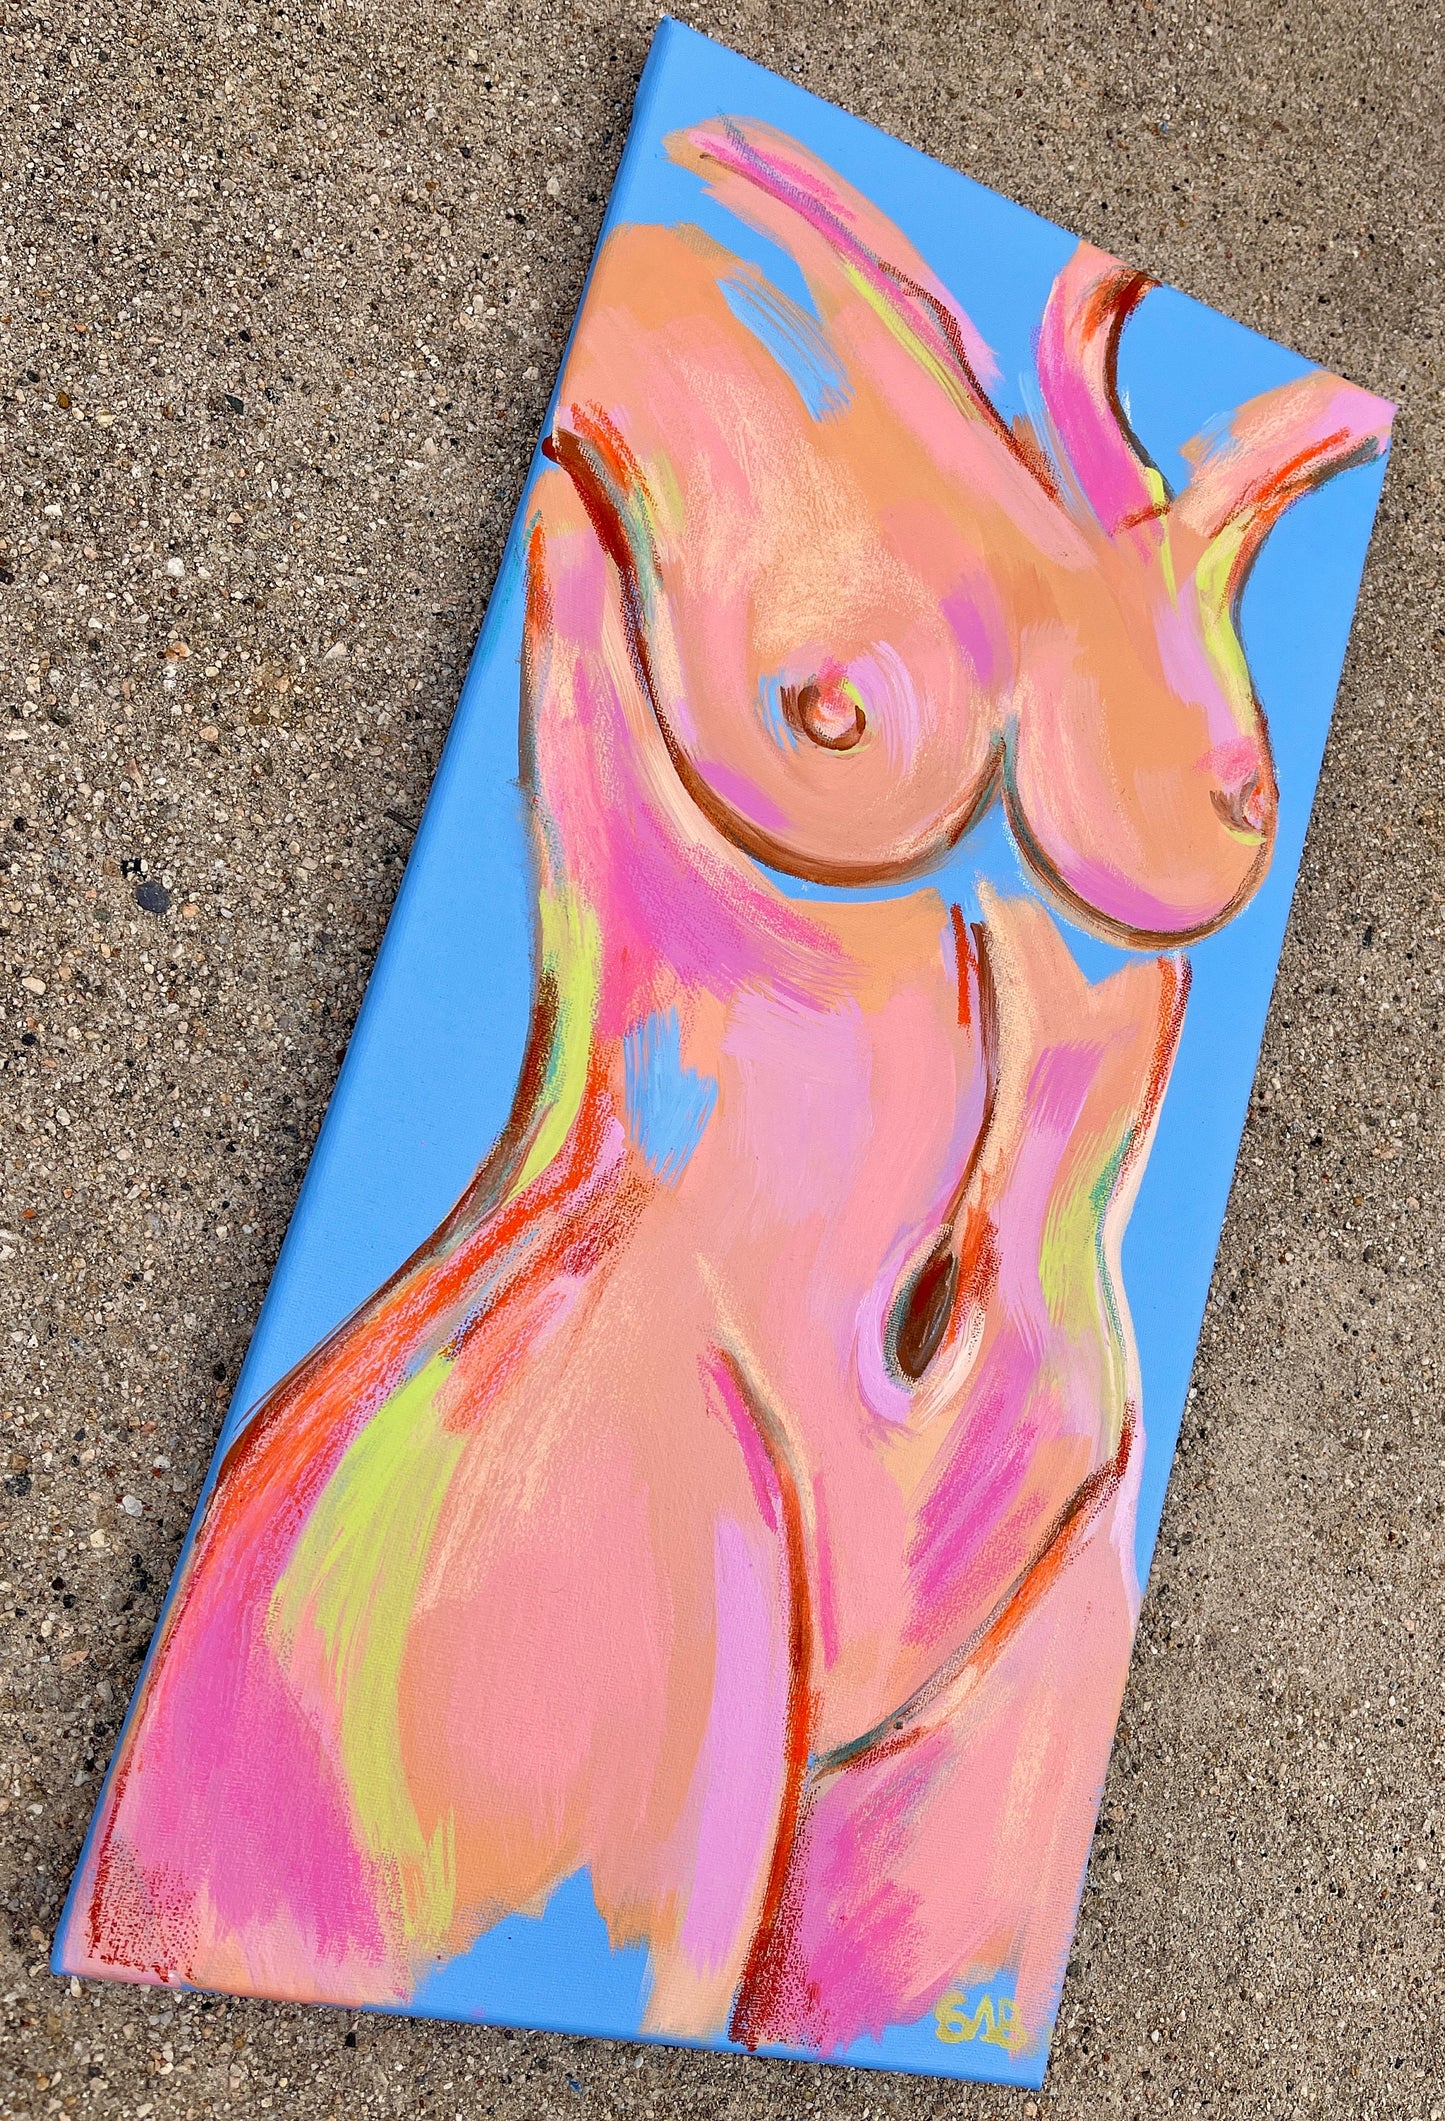 Abstract figurative female nude body painting wall poster acrylic modern home decor lesbian art 10x20 canvas art